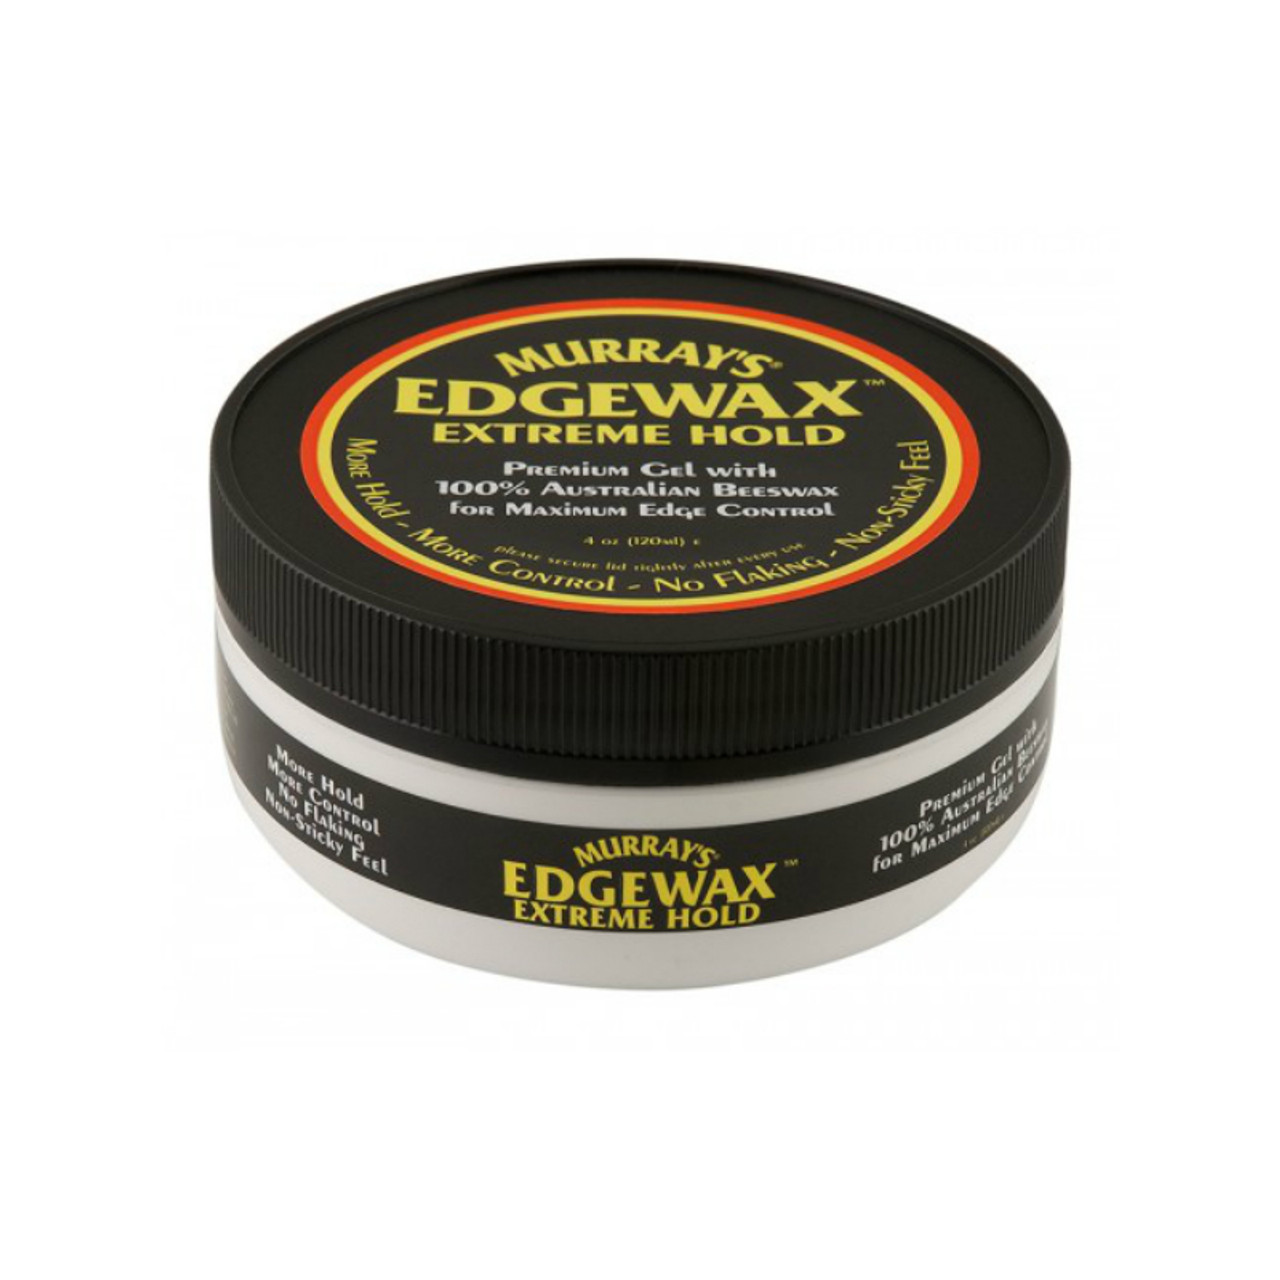 Murray's Texture King Gel Pomade 6 oz - 4th Ave Market